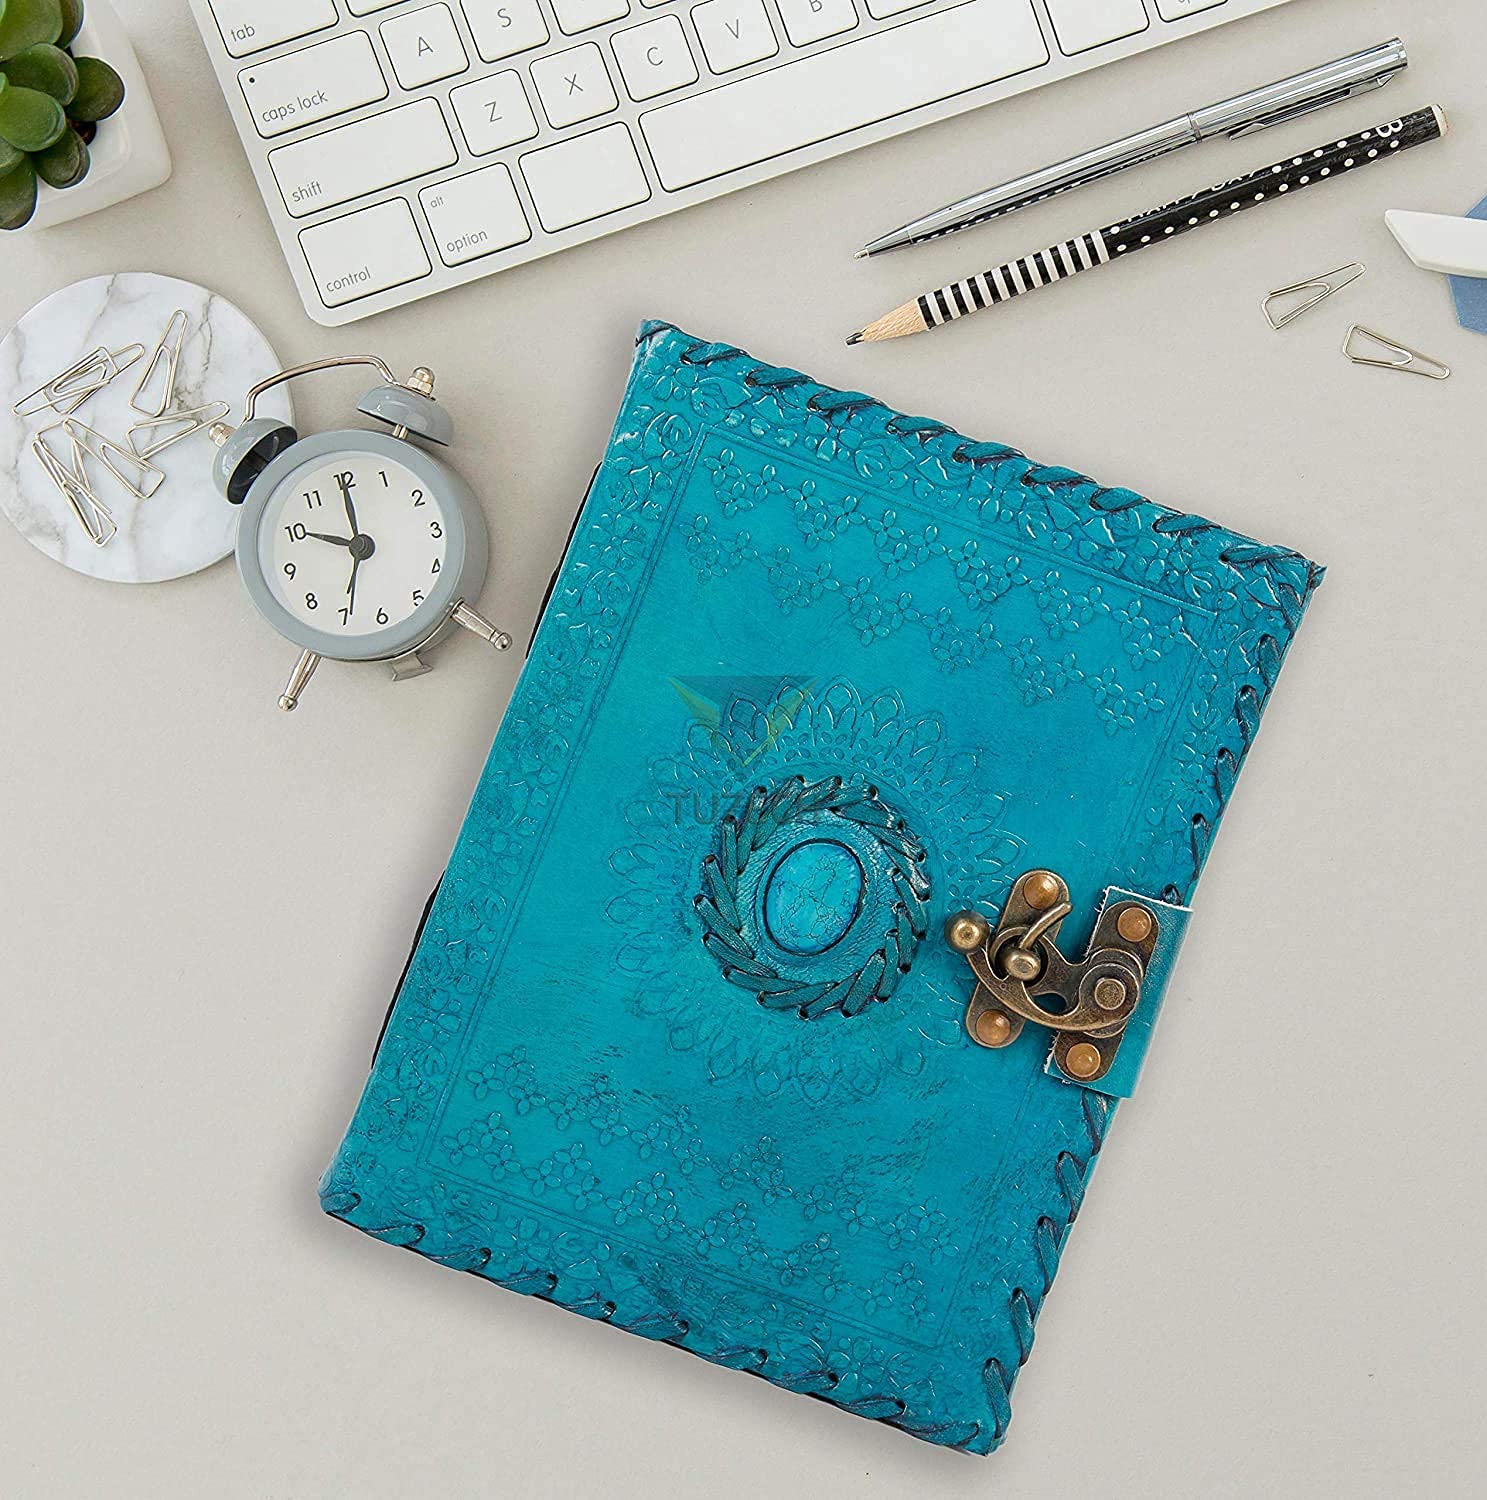 Leather Diary Journal Notebook with Lock Embossed Handmade Paper